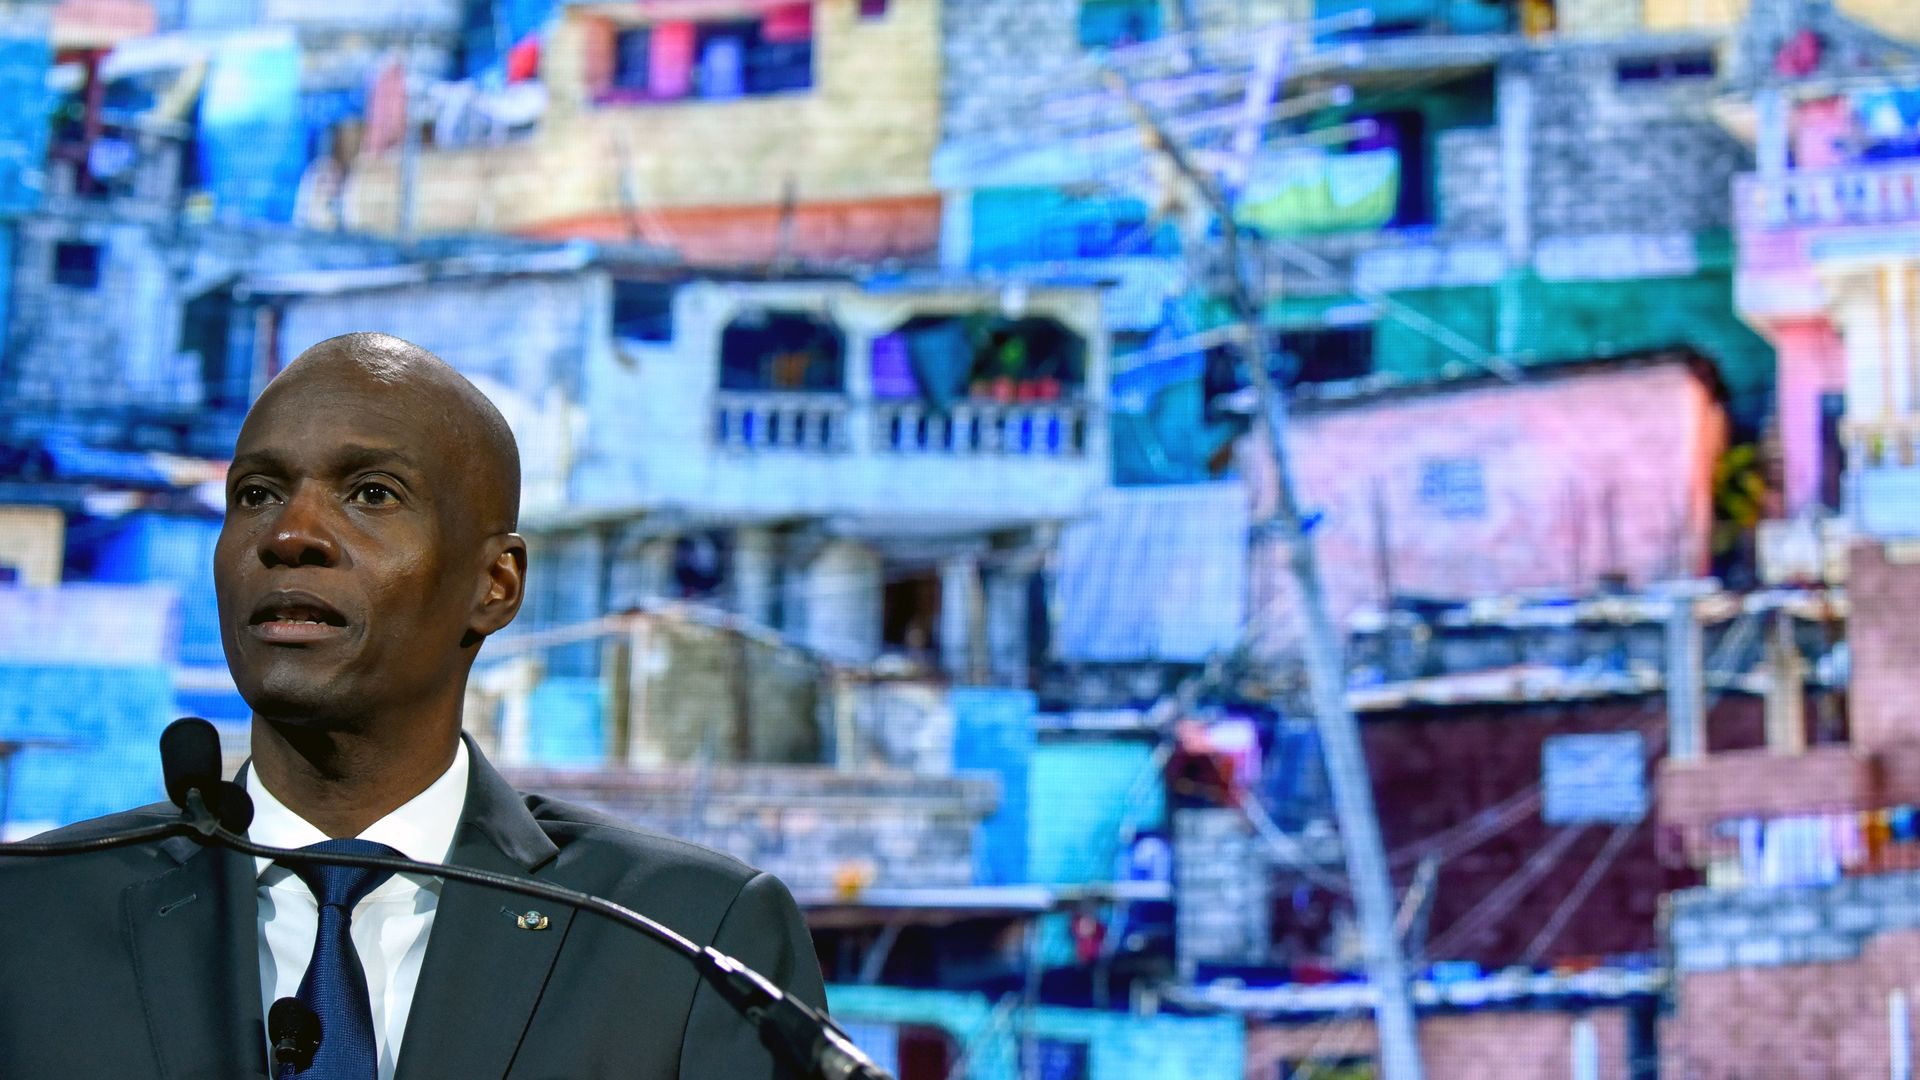 Haiti President Jovenel Moise is seen while delivering a speech.